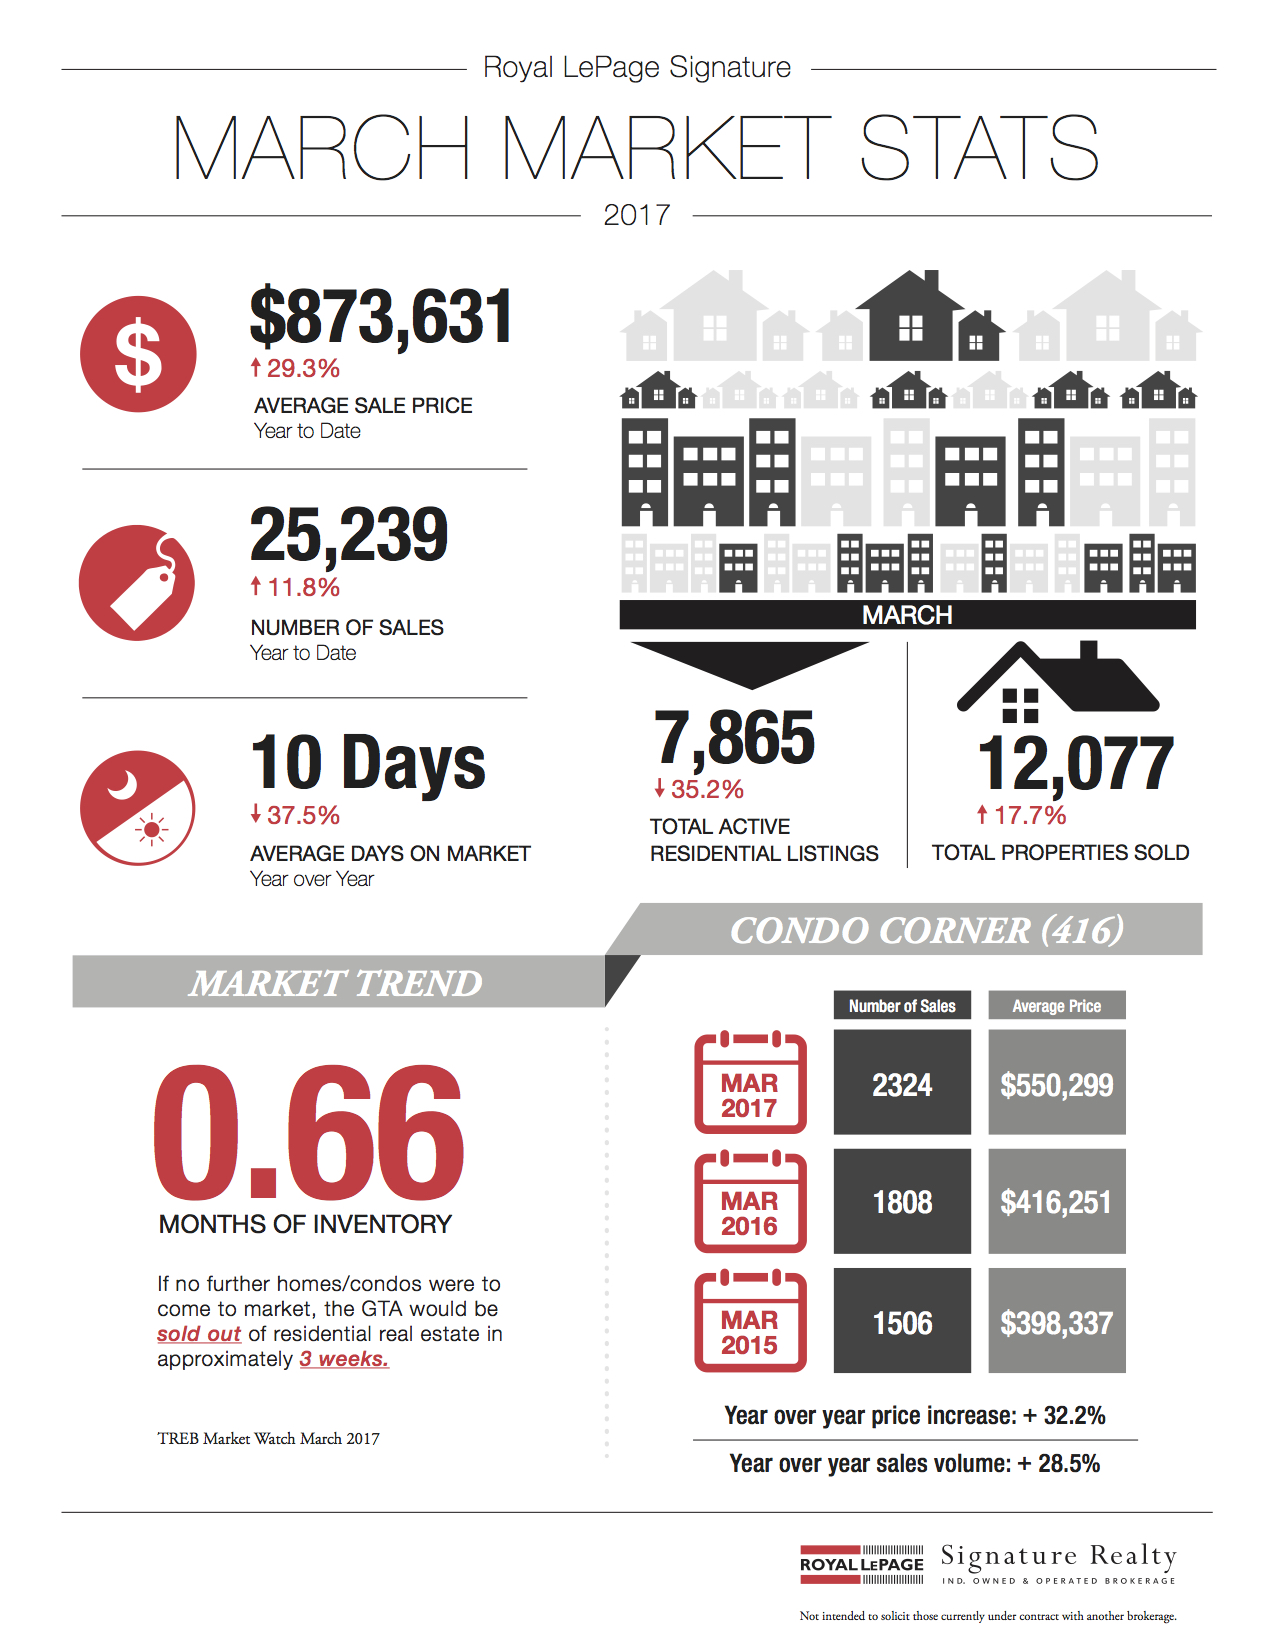 March 2017 Market Stats: Infographic & Report Photo